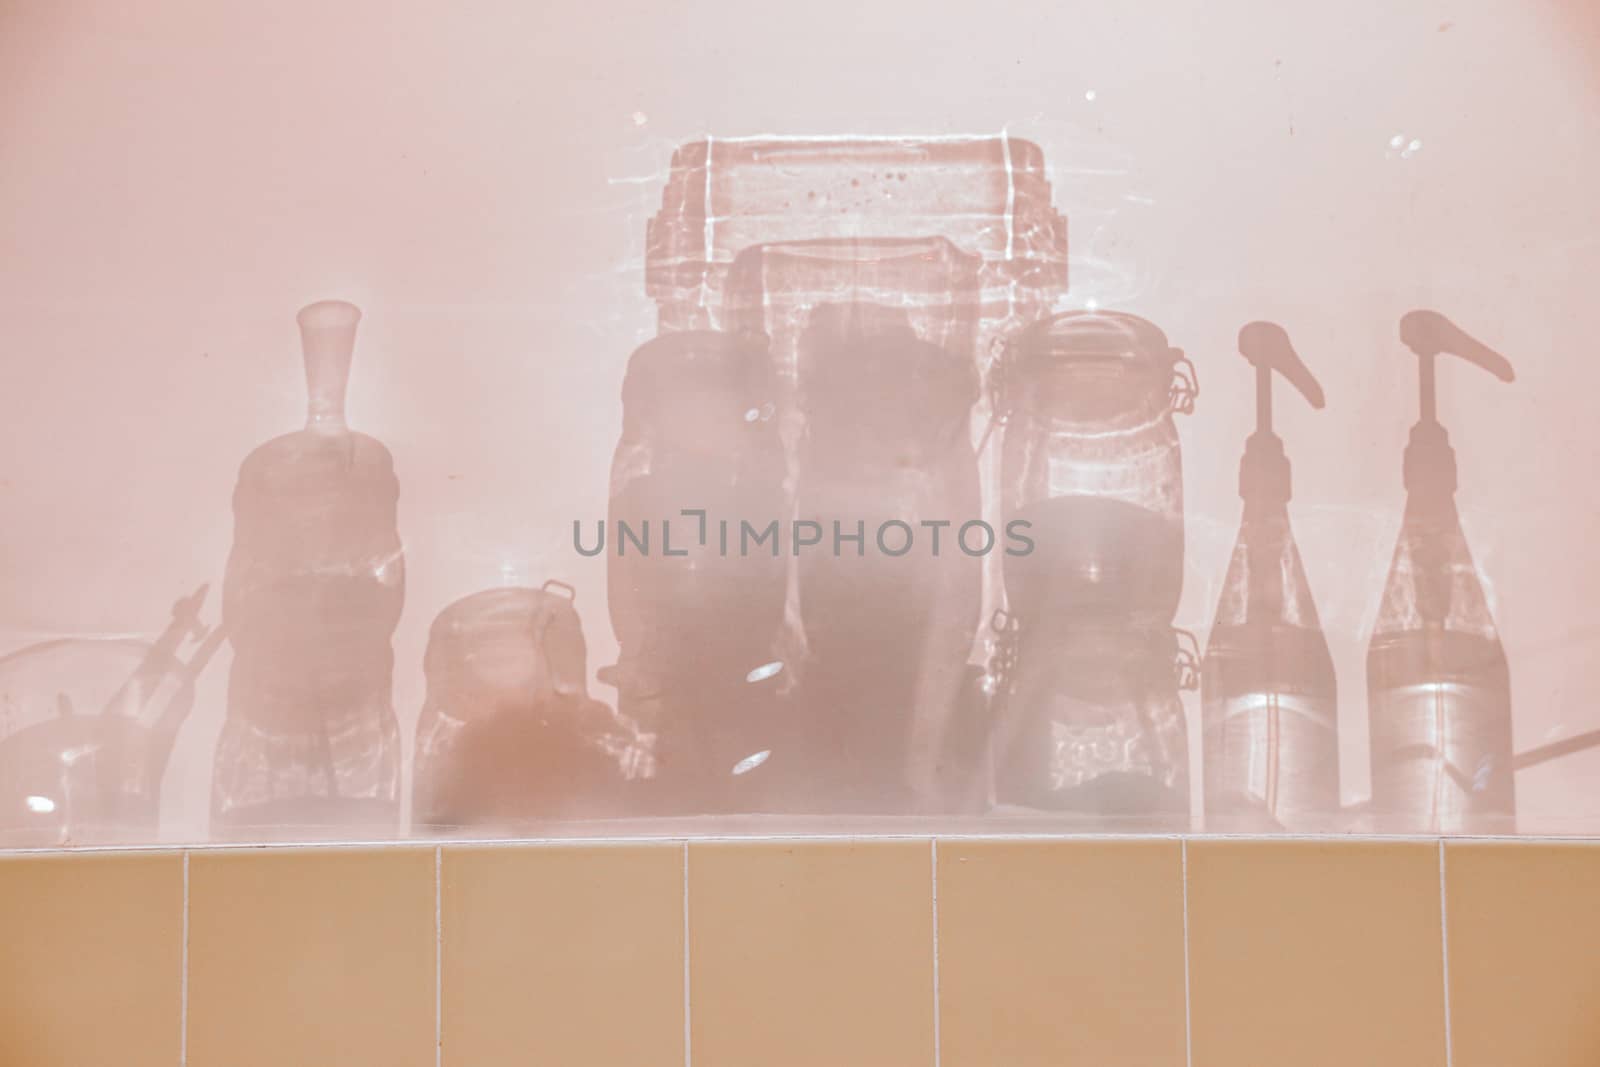 Conceptual photo showing the silhouettes of glass bottle containers to show concept of sanitation, infection control and good hygiene to fight the spread of covid-19 pandemic